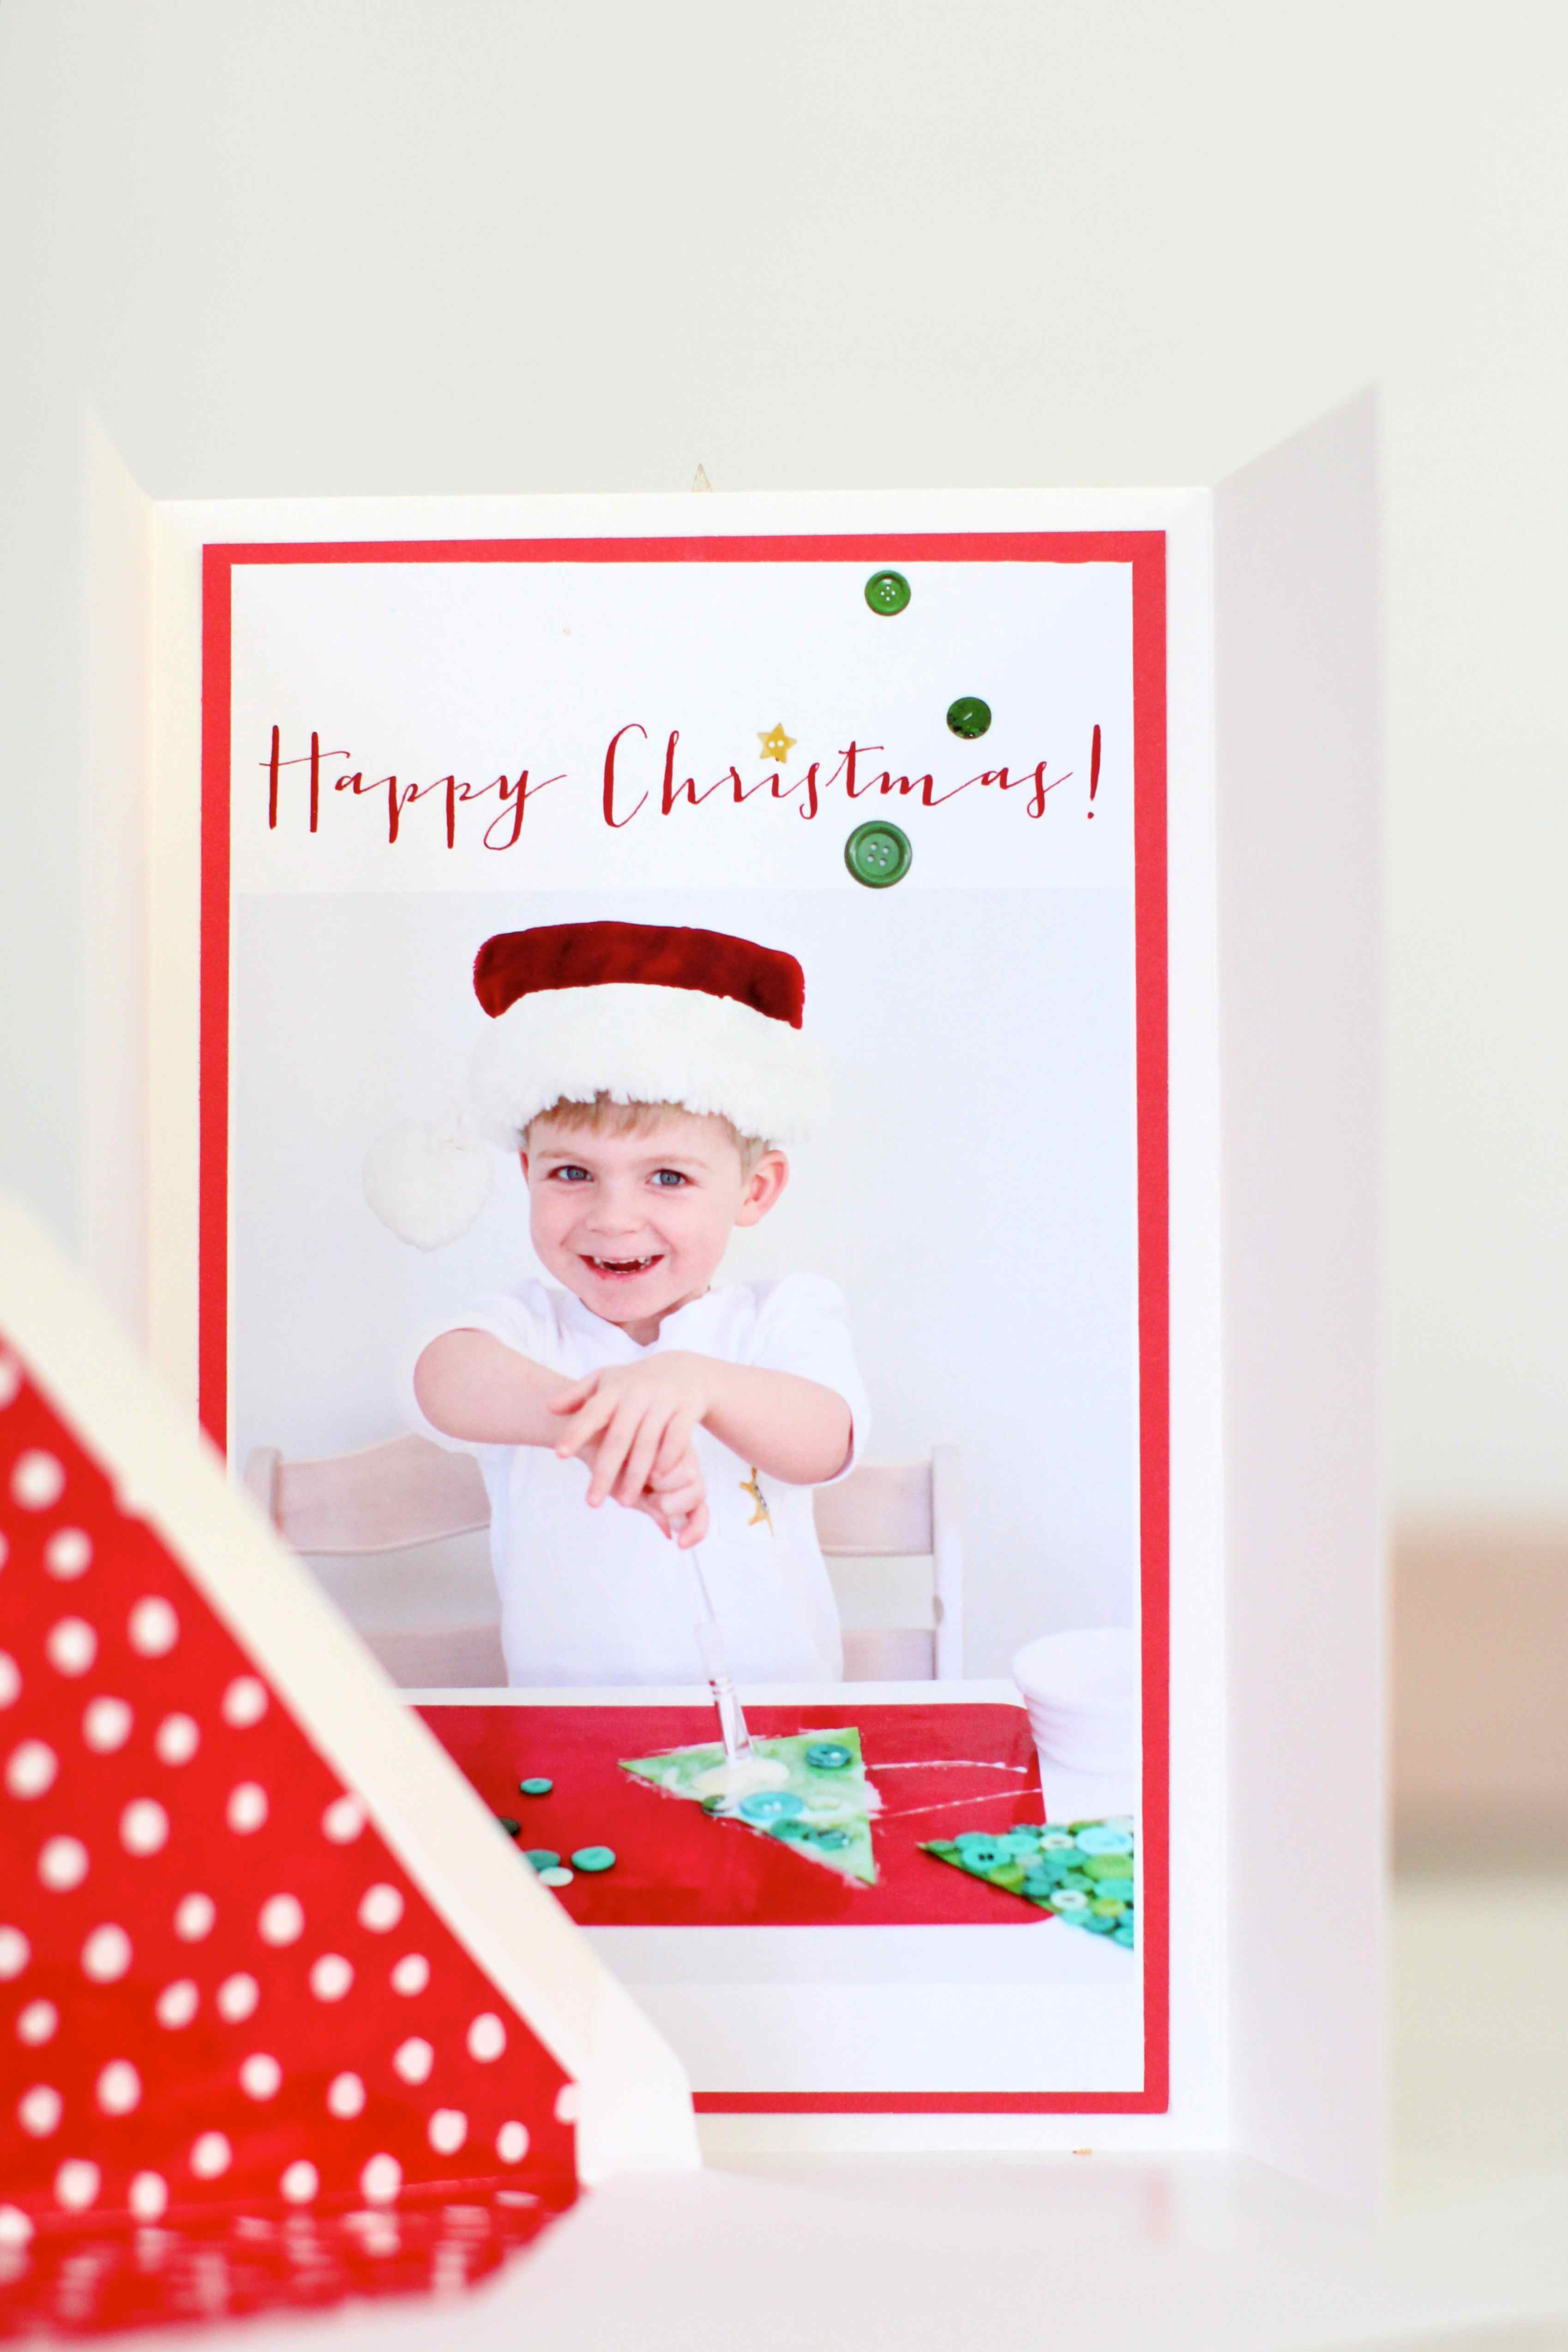 DIY Christmas Cards For Kids
 Messy play DIY Button Christmas Cards